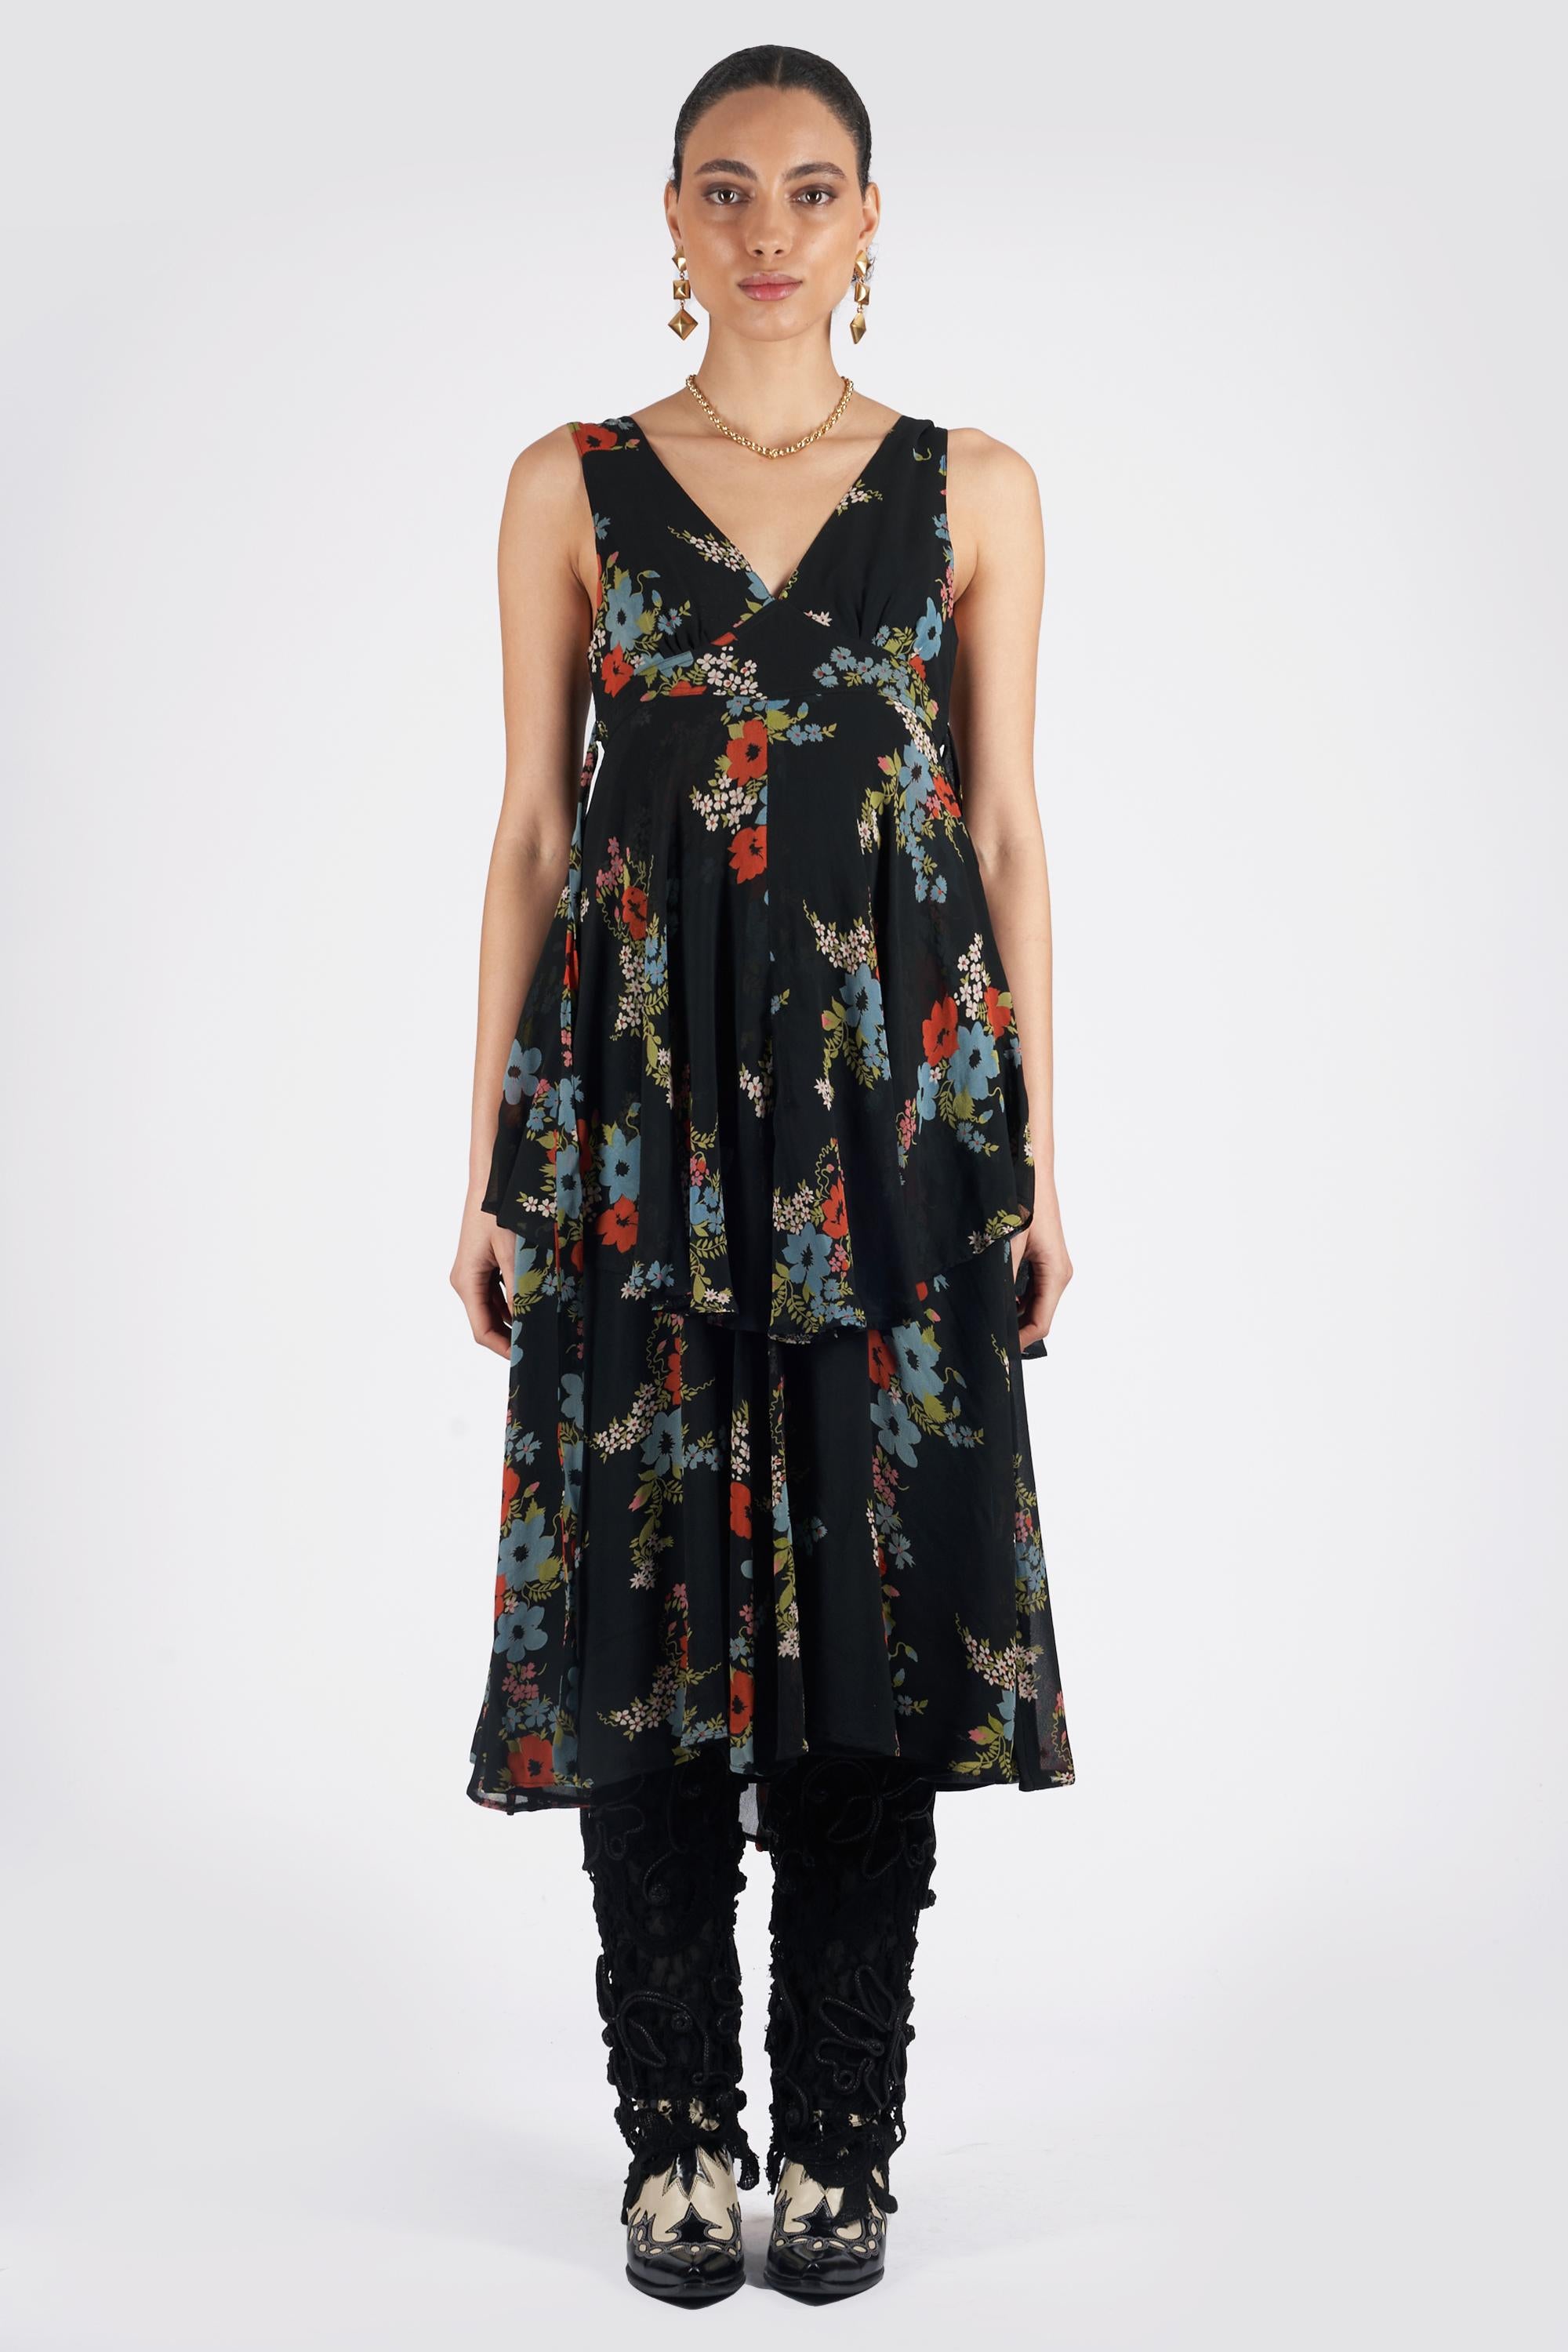 Women's or Men's Vintage 1970’s Sleeveless Floral Layered Dress For Sale